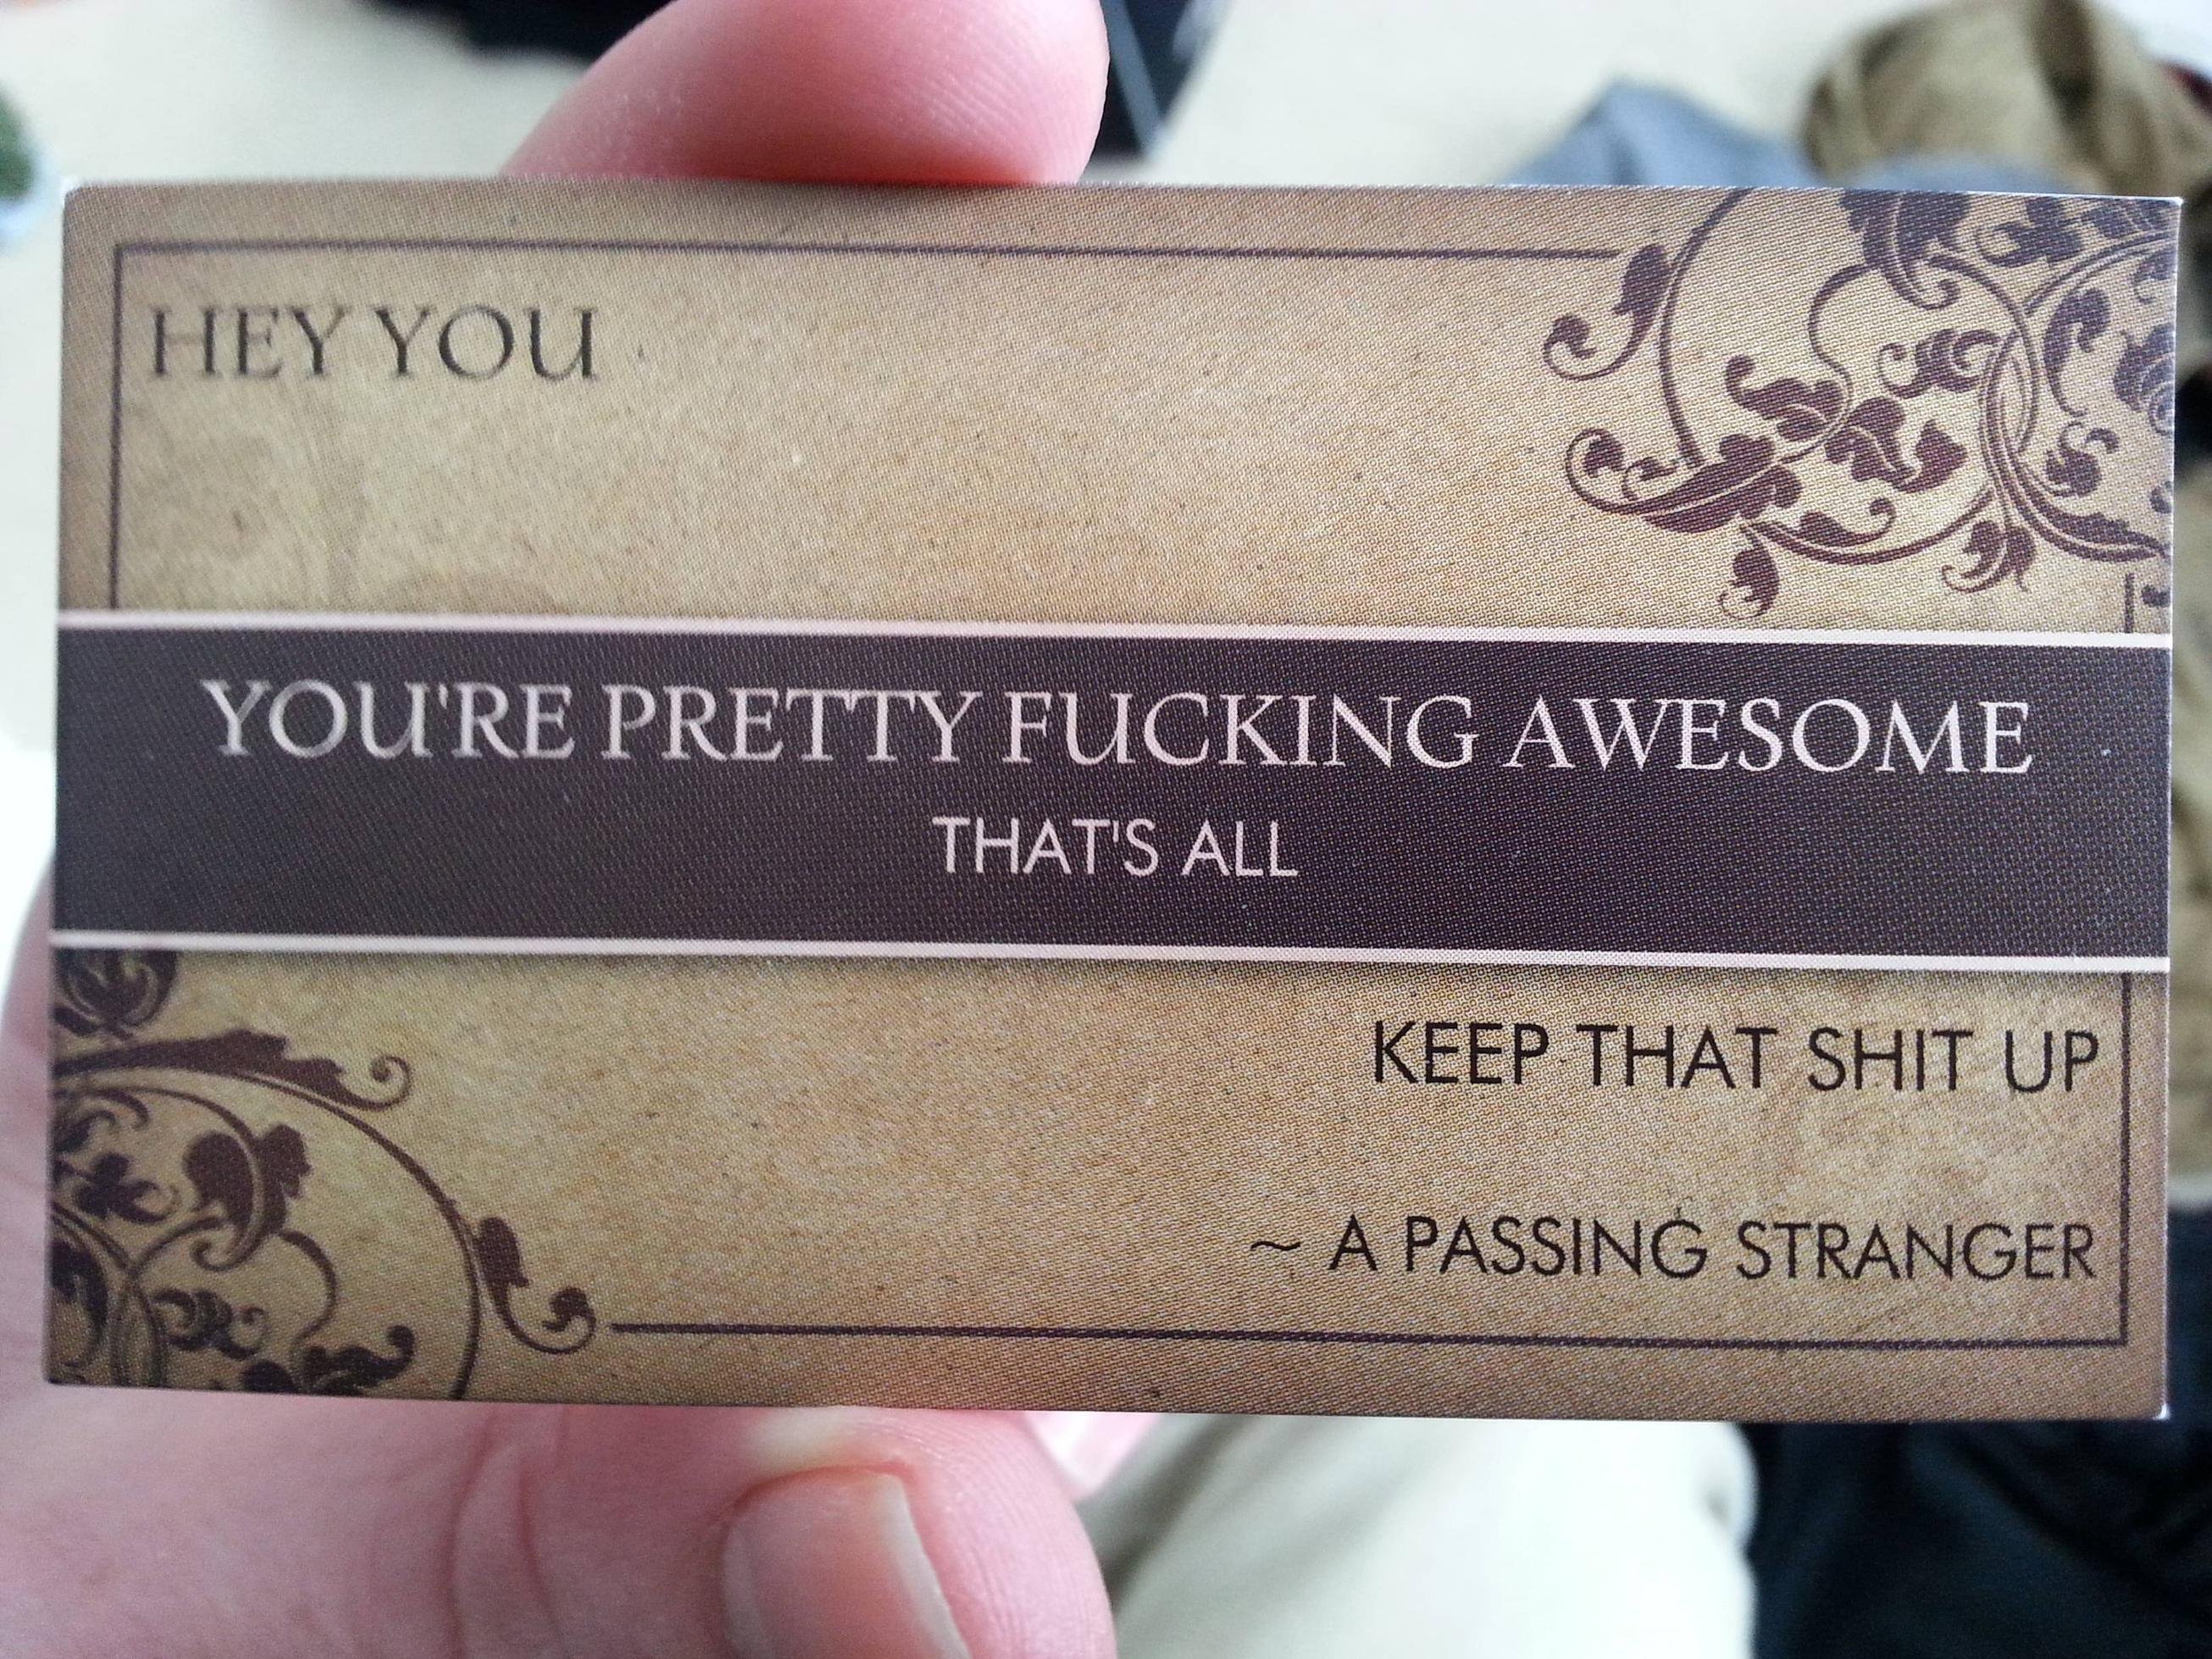 A passing stranger handed me this today